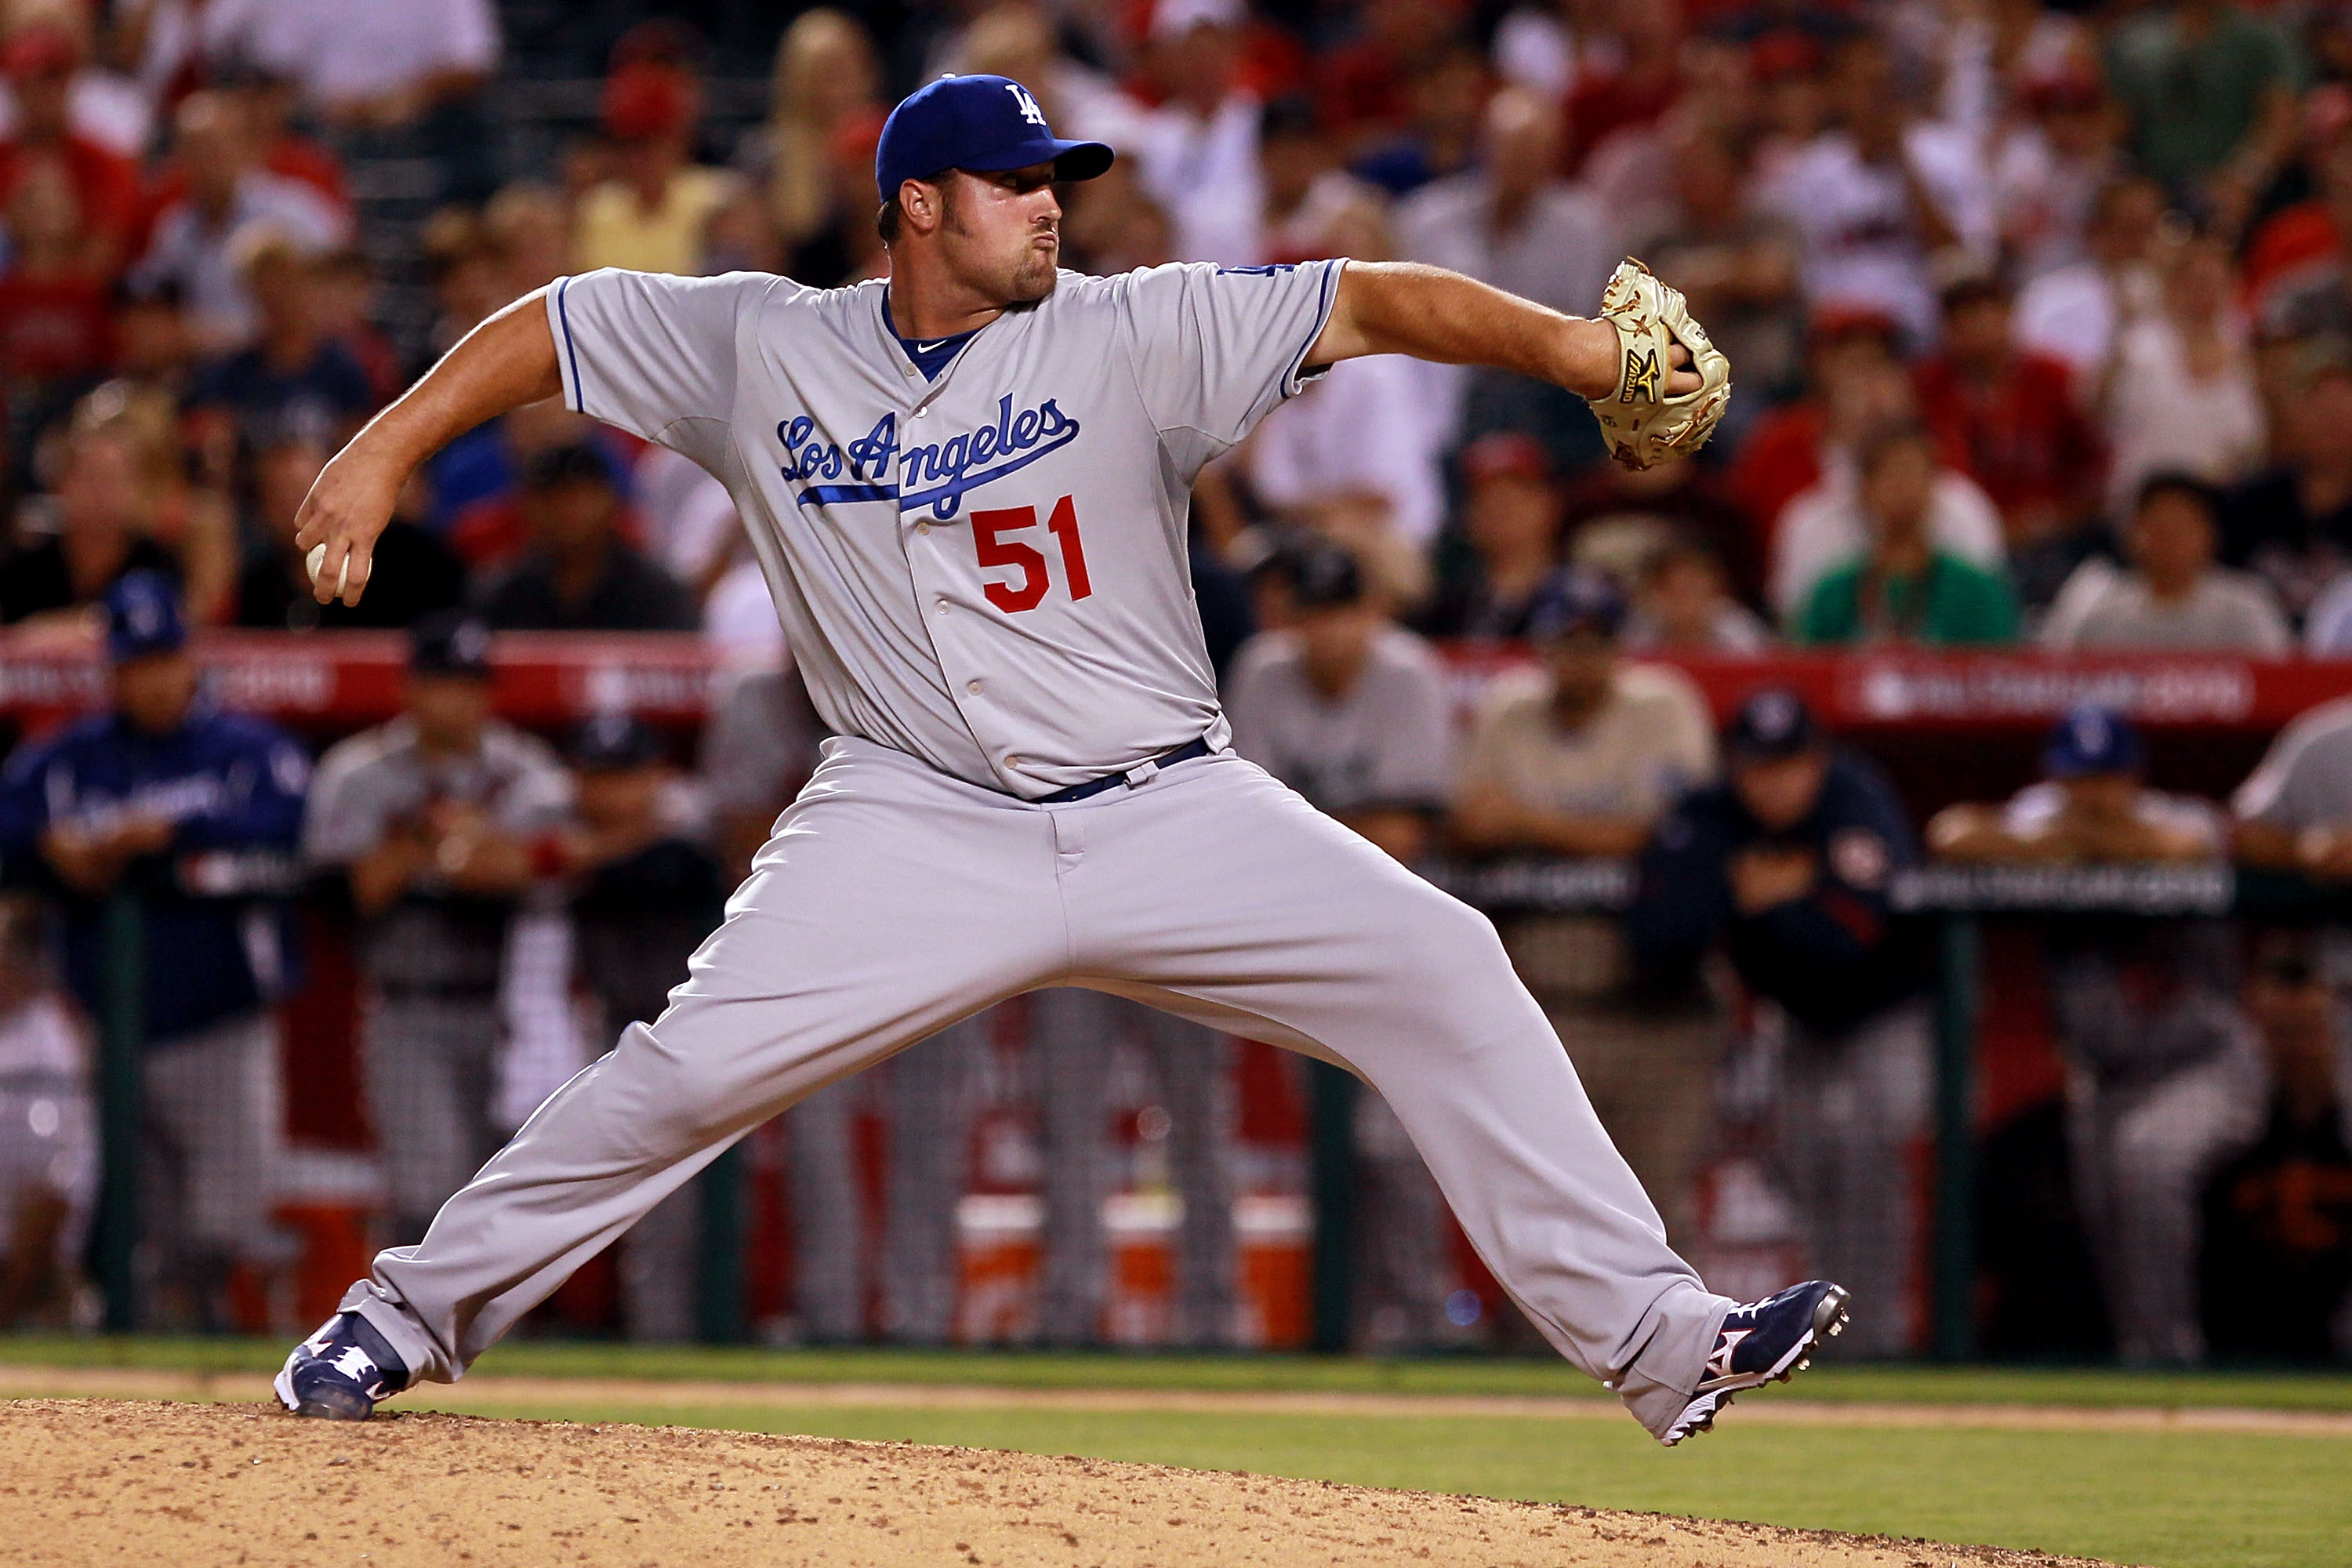 ANAHEIM, CA - JULY 13:  National League All-Star Jonathan Broxton #51 of the Los Angeles Dodgers throws a pitch during the 81st MLB All-Star Game at Angel Stadium of Anaheim on July 13, 2010 in Anaheim, California.  (Photo by Jeff Gross/Getty Images)